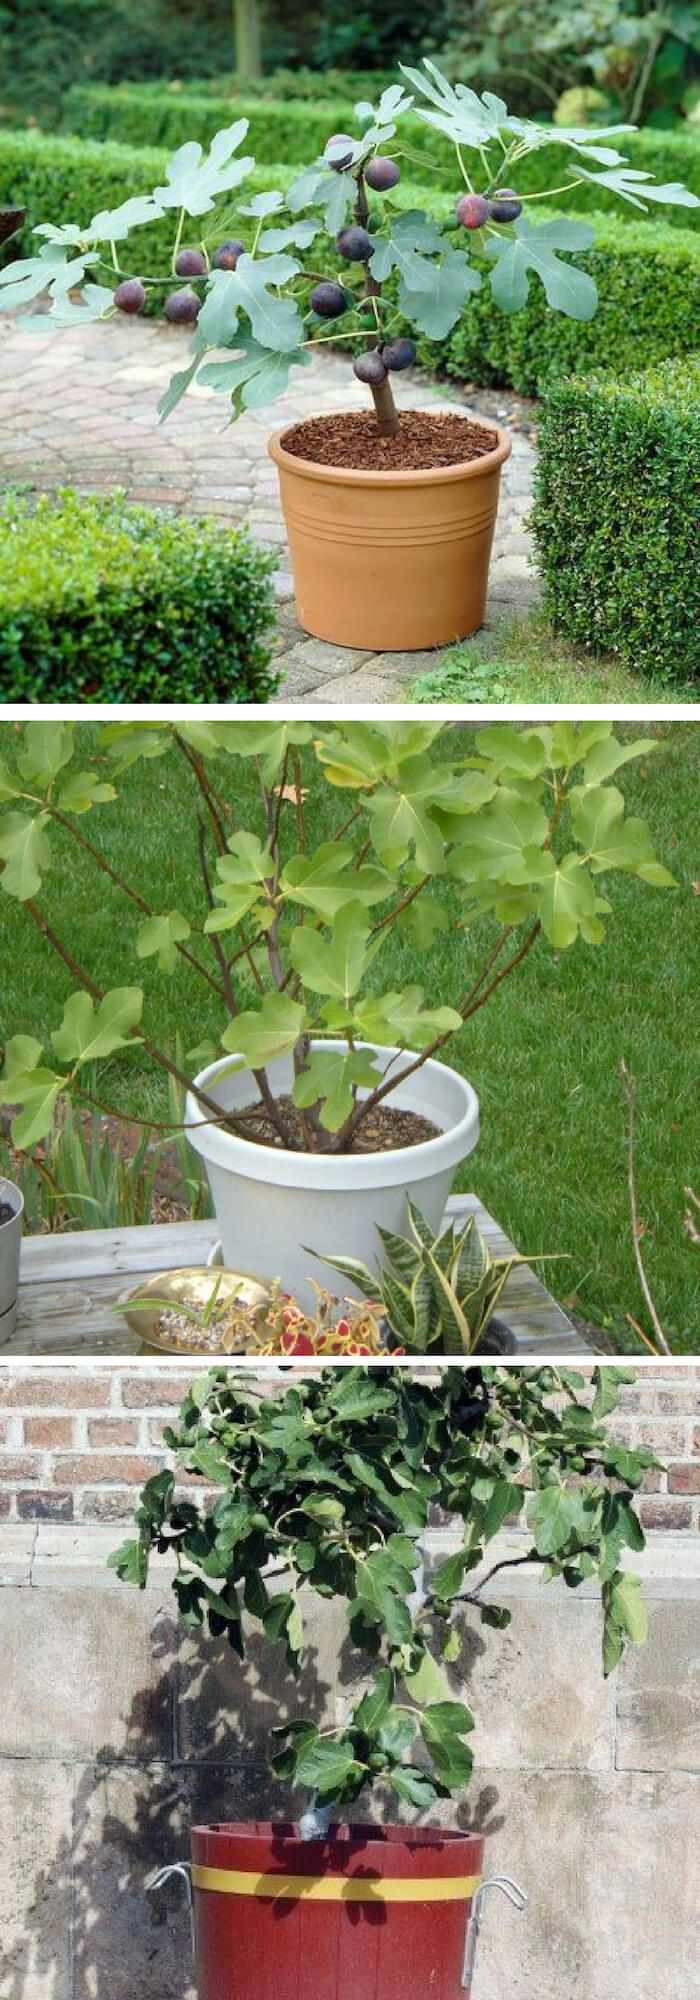 How to grow fig trees in containers